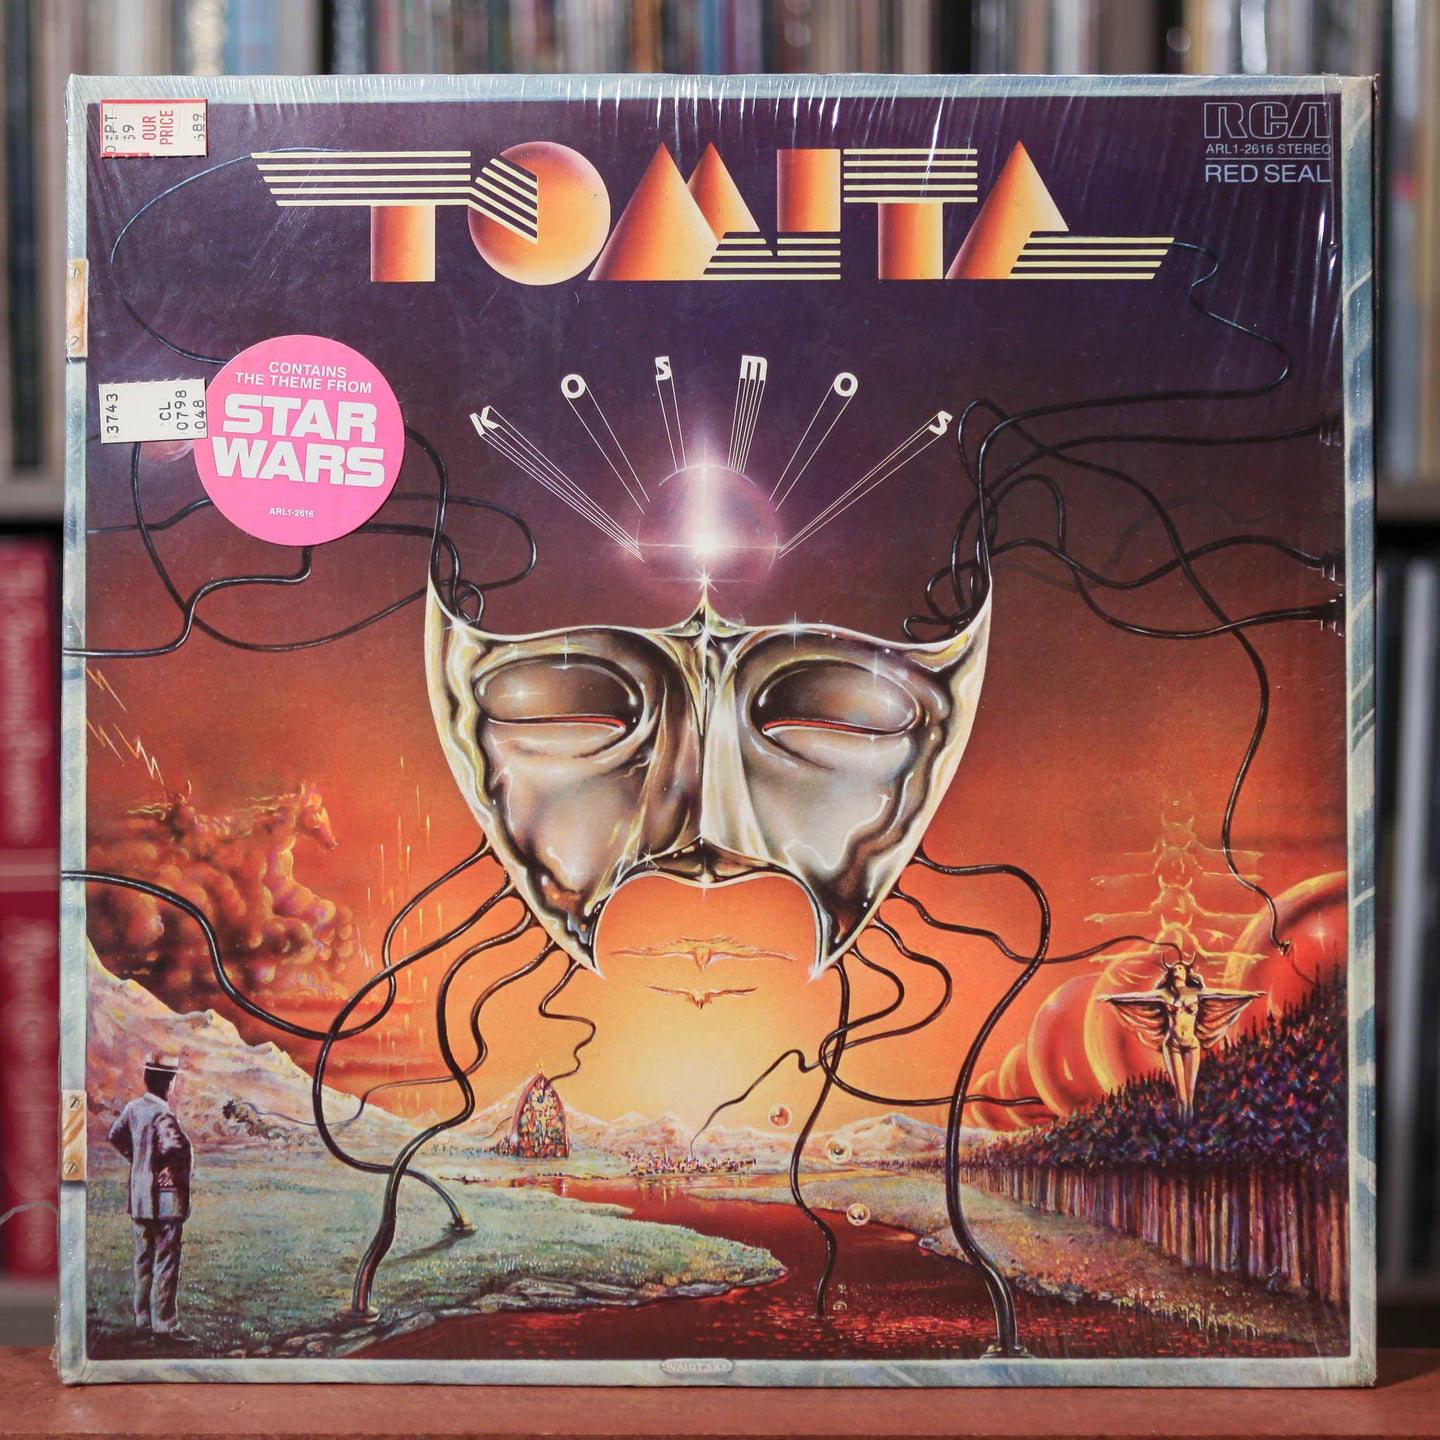 Tomita - Kosmos - 1978 RCA Red Seal, EX/NM w/Shrink And Hype